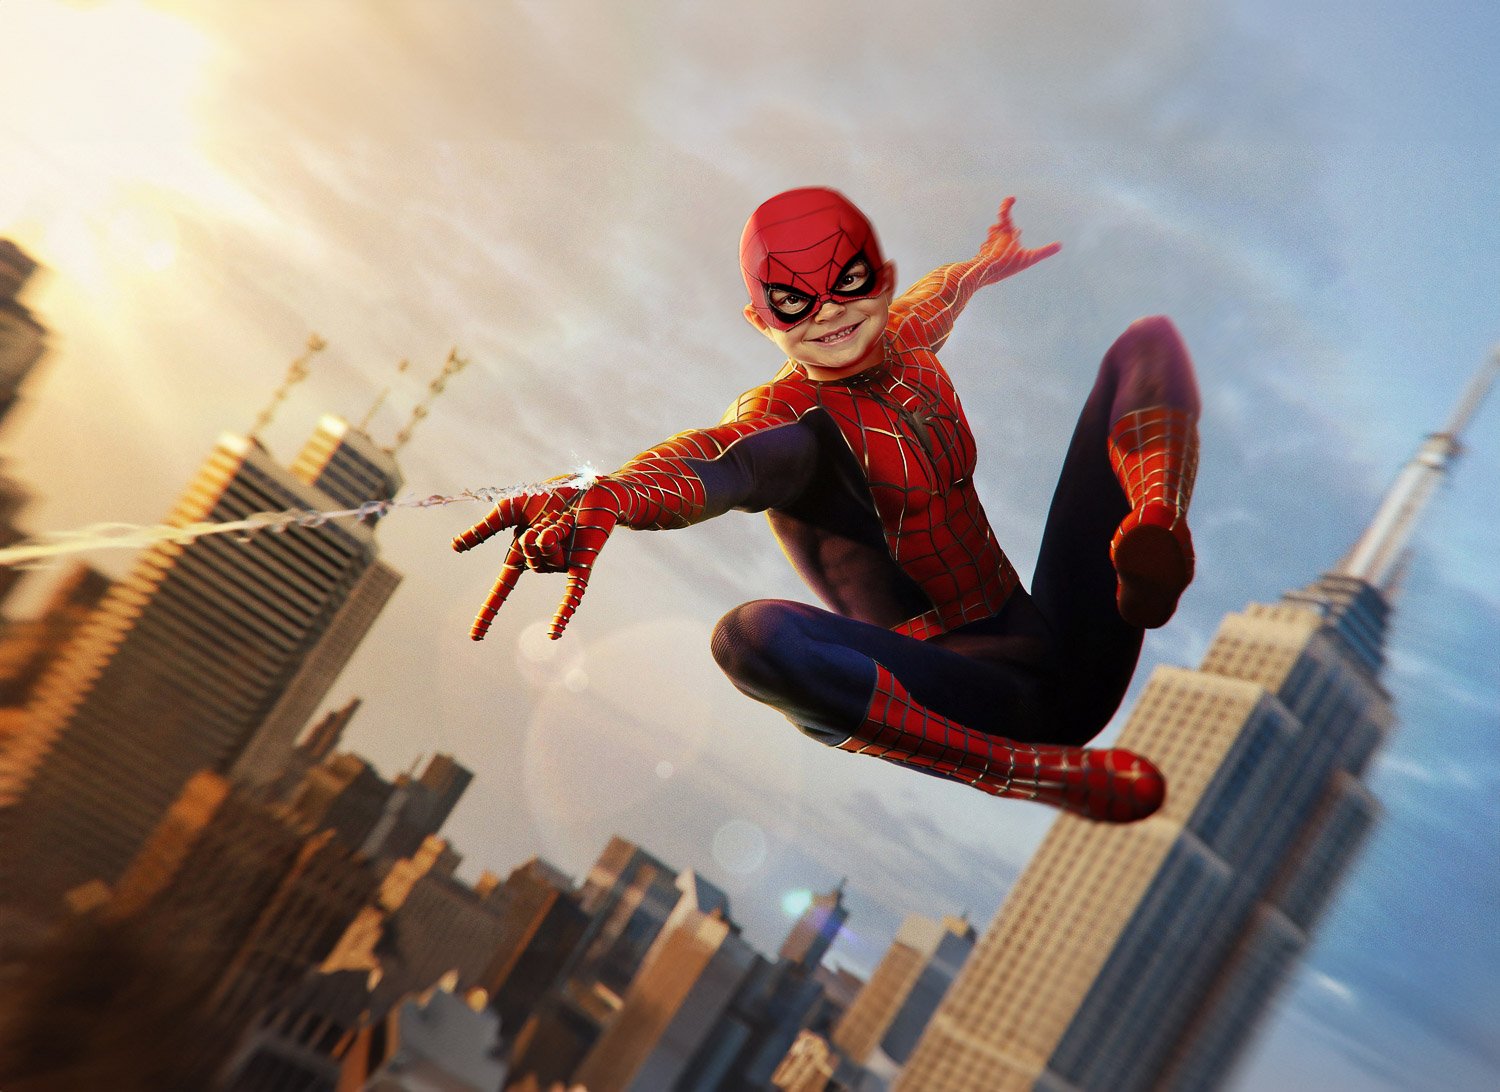 Young boy dressed as Spiderman leaping high above city